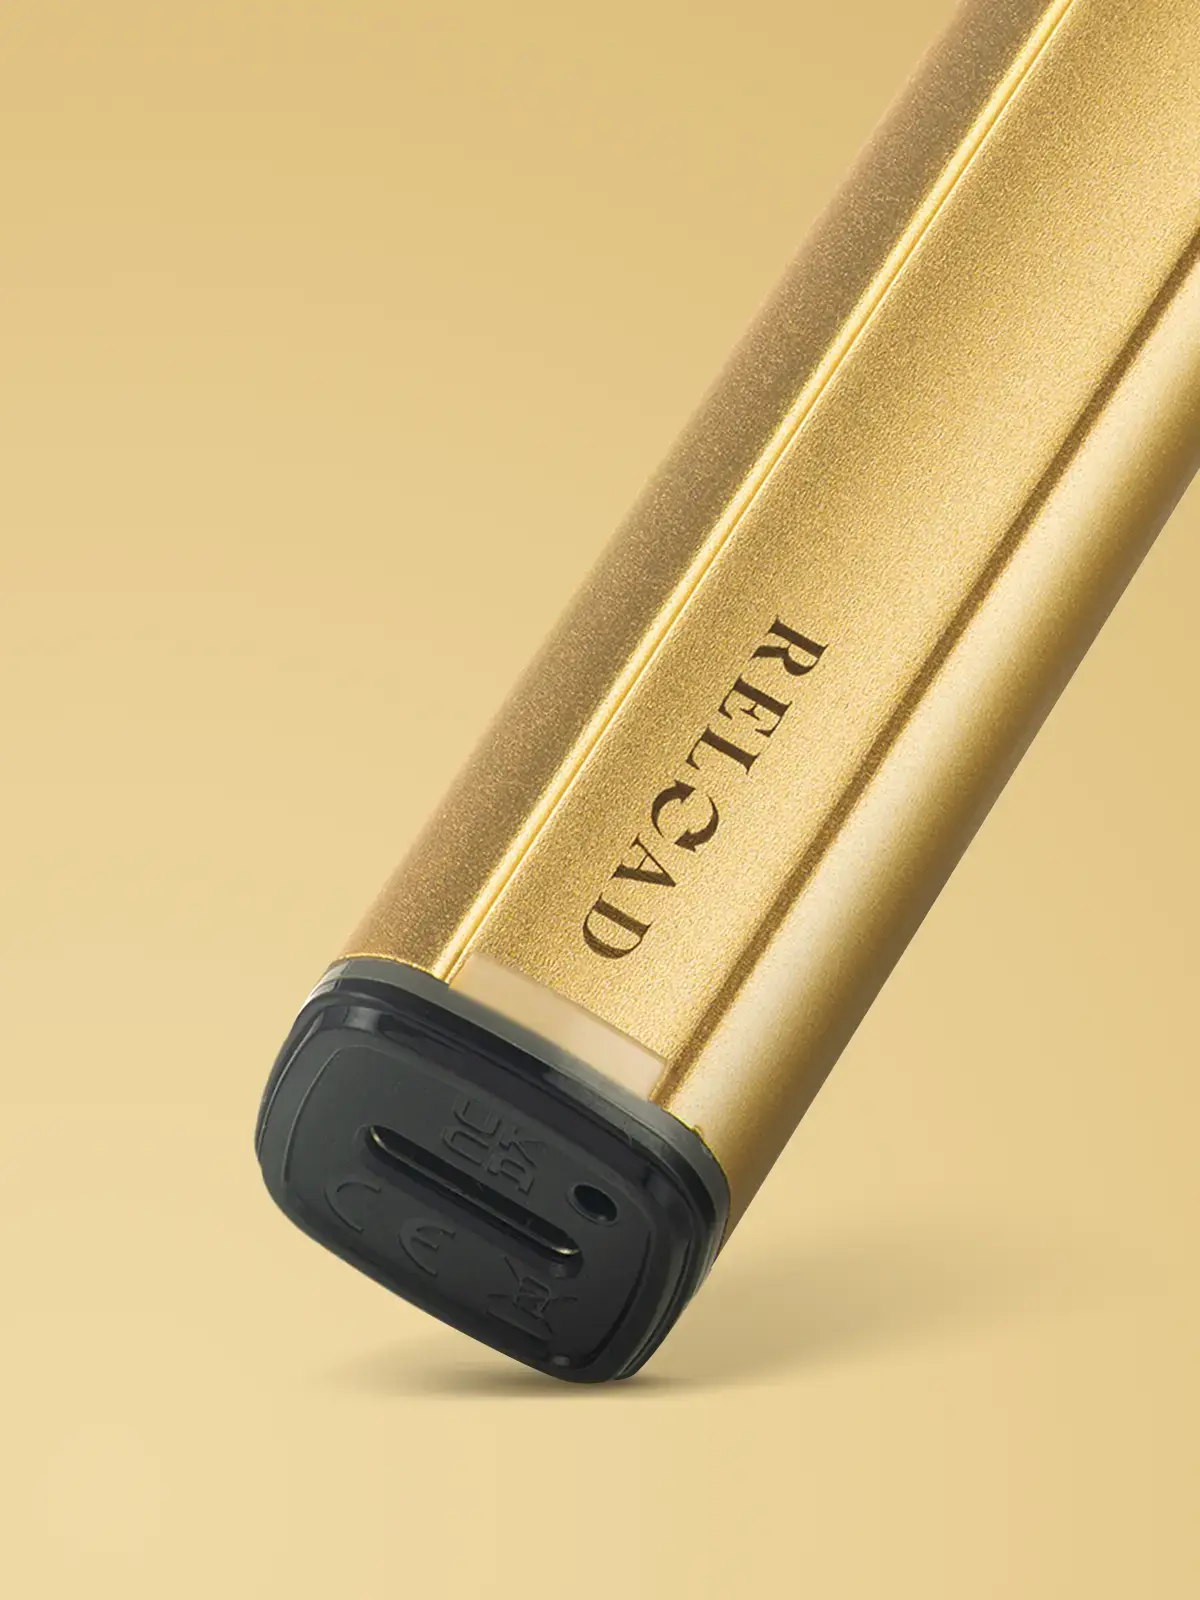 A zoomed-in shot of the Gold Bar Reload device showing the USB port on the bottom